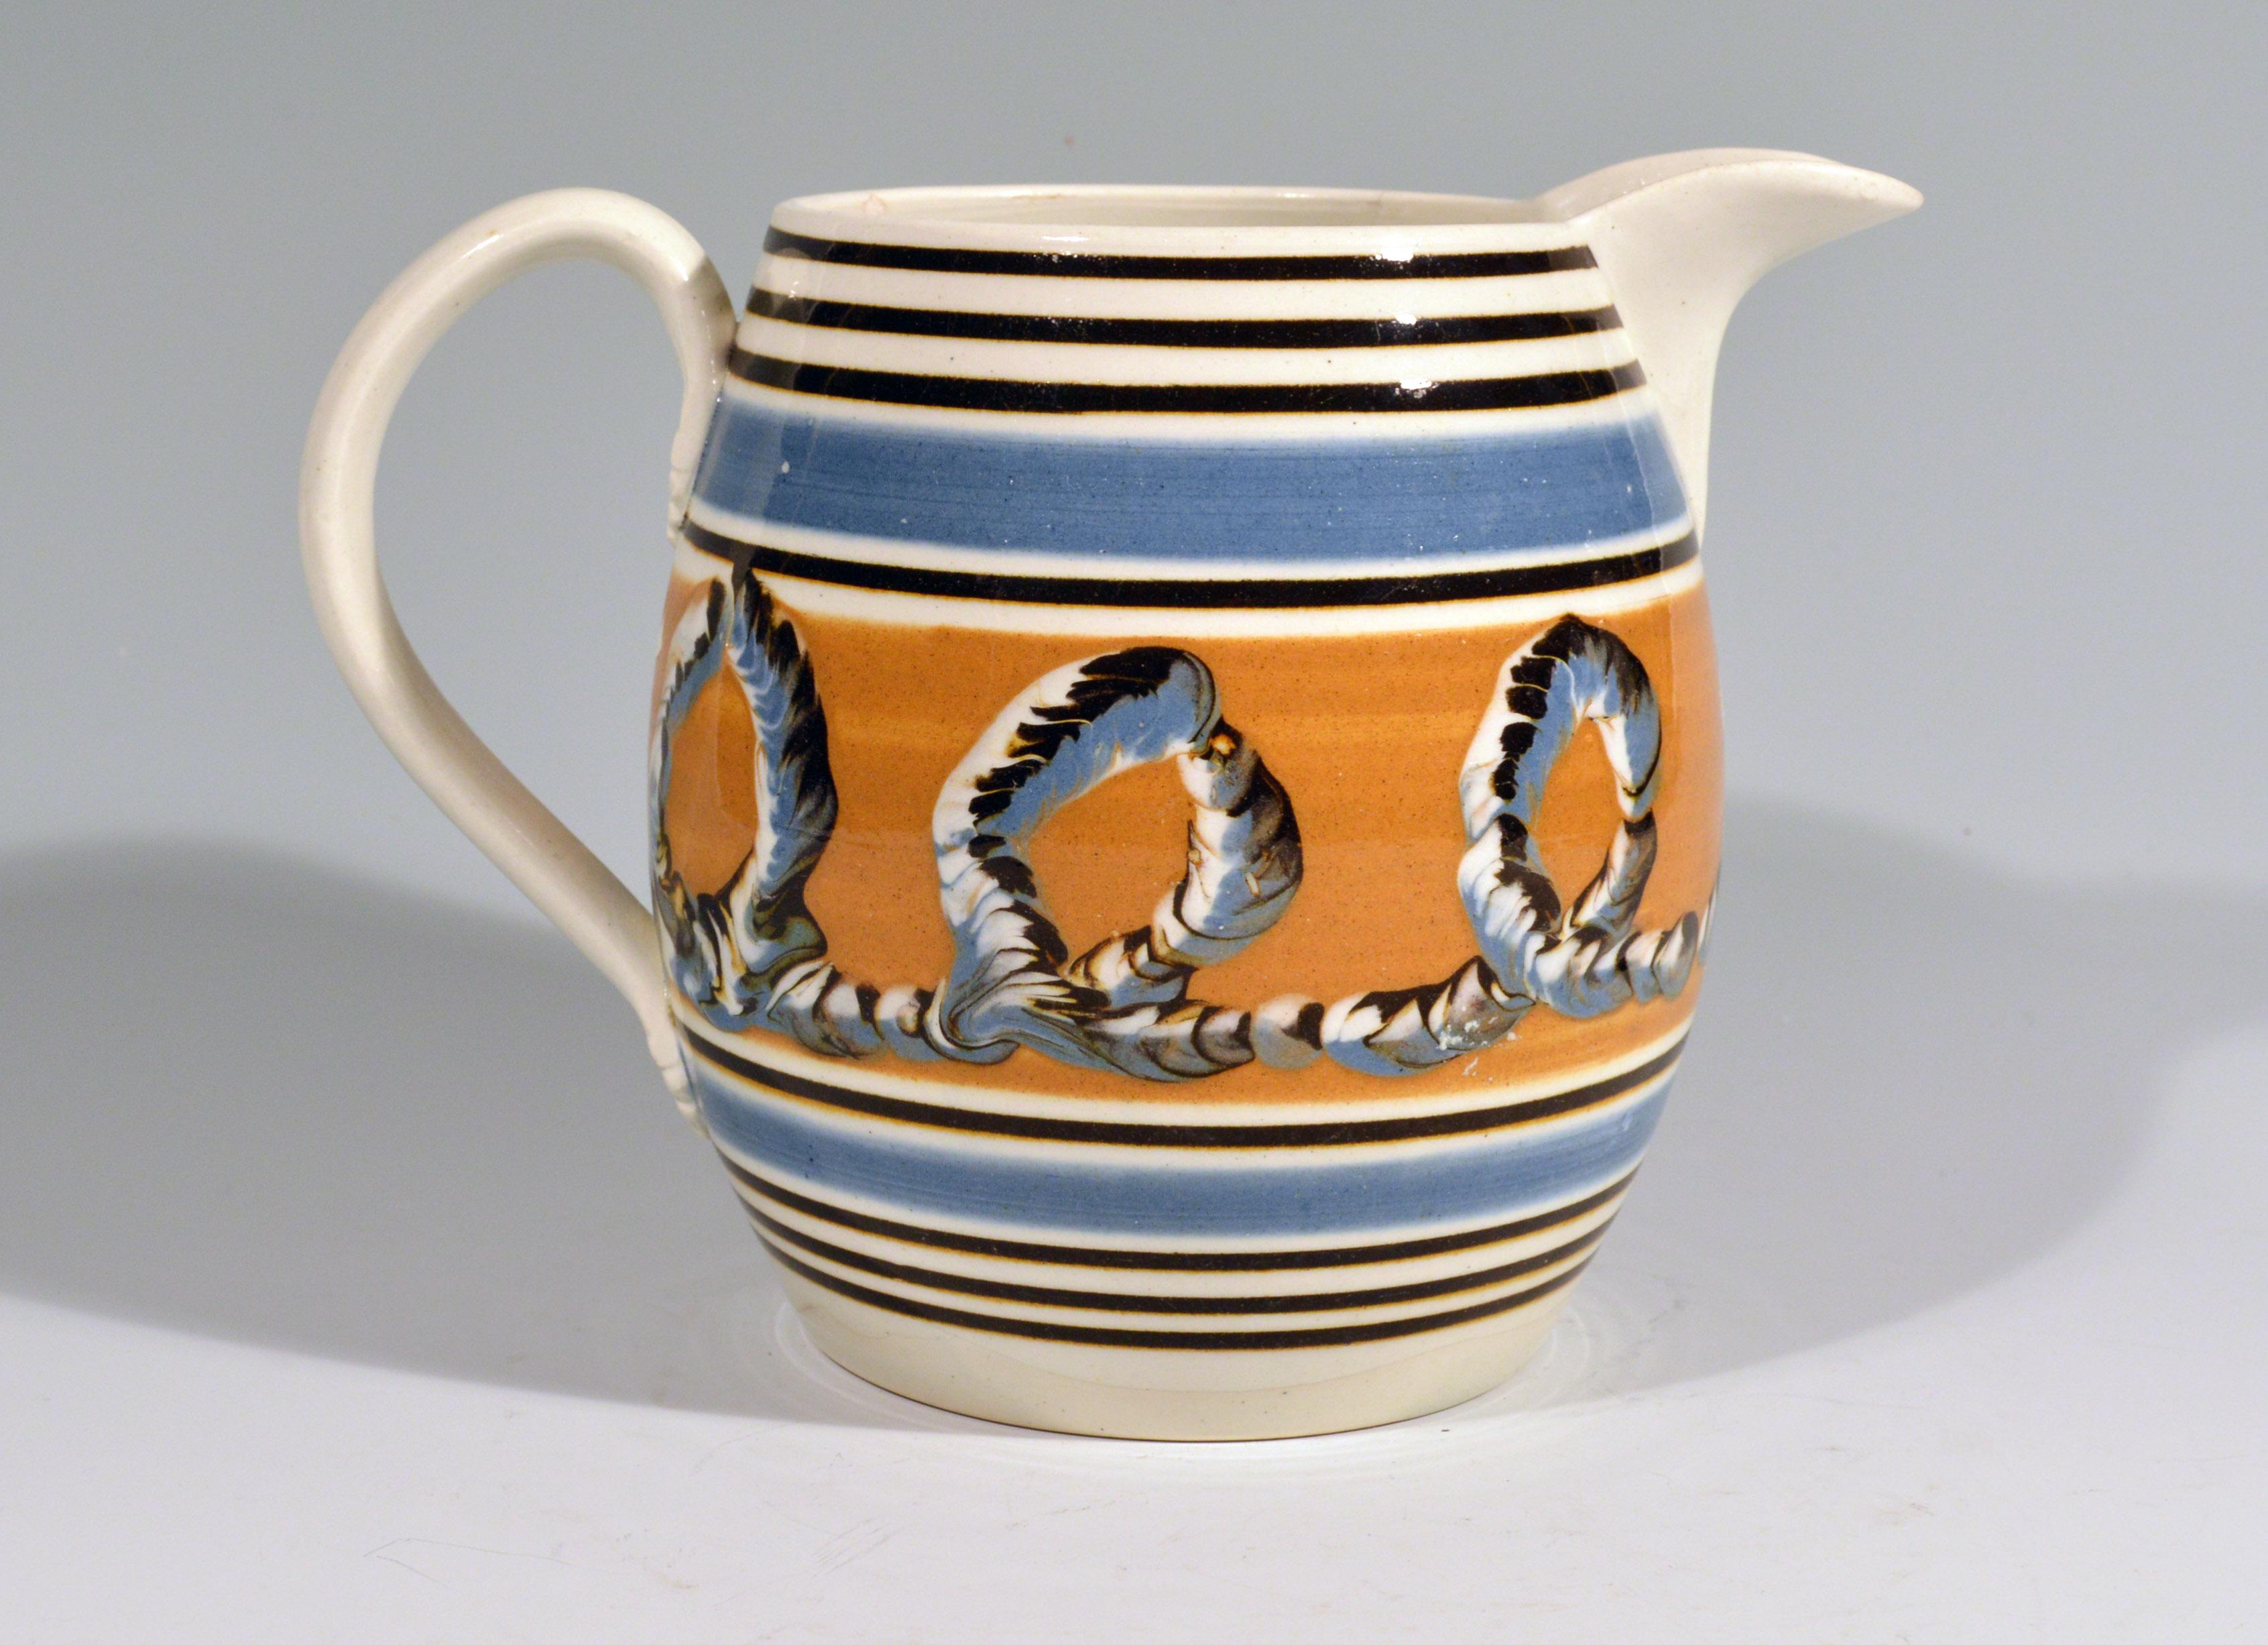 Banded pearlware mocha jug with Earthworm design, 
1790-1810.

The barrow-form jug has a wide central band of ochre decorated with a three-color earthworm design. Above and below are a series of line in blue and brown. The loop handle with leaf